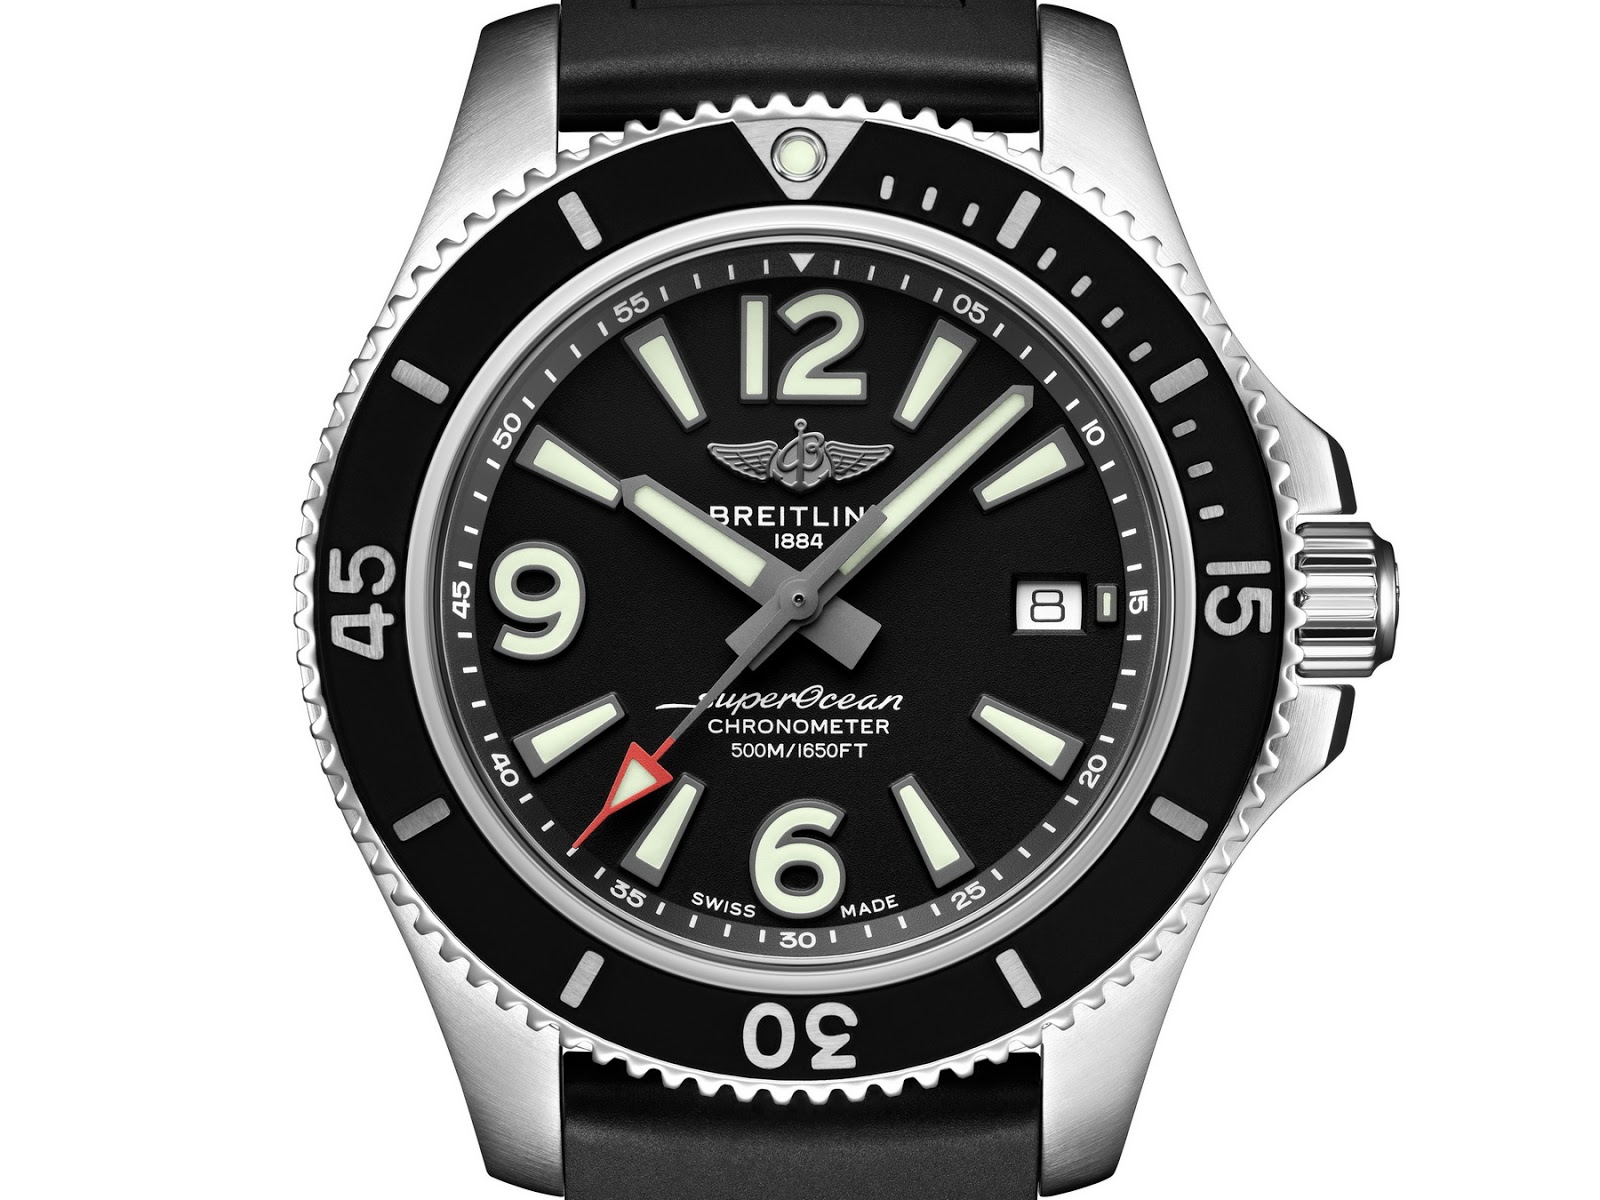 Breitling's newest from Baselworld 2019 BREITLING%2BSuperocean%2B42%2B04